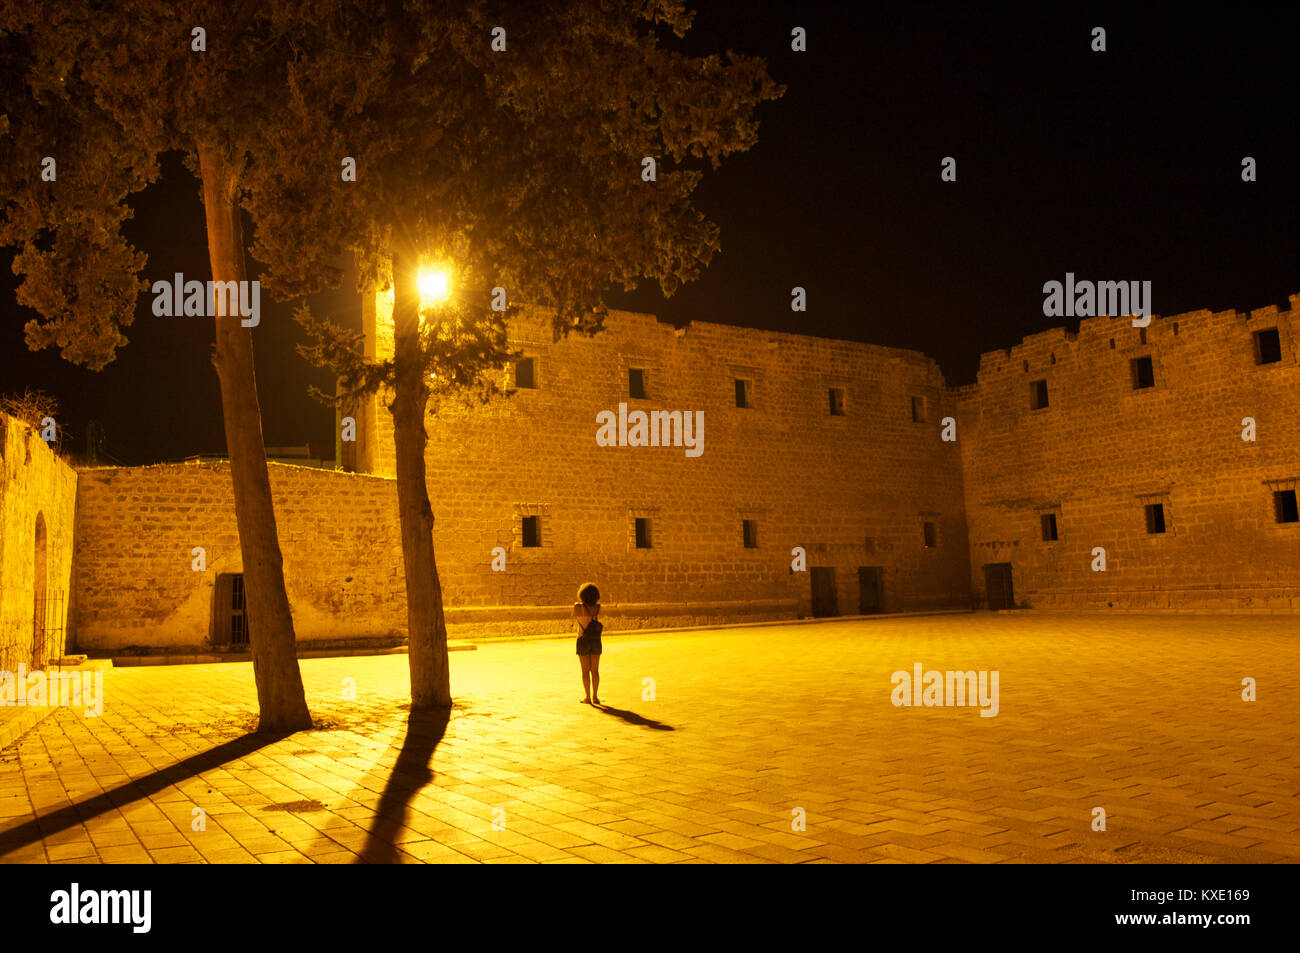 The old walled city of Famagusta by night with a woman taking a photo of the wall, Cyprus Stock Photo